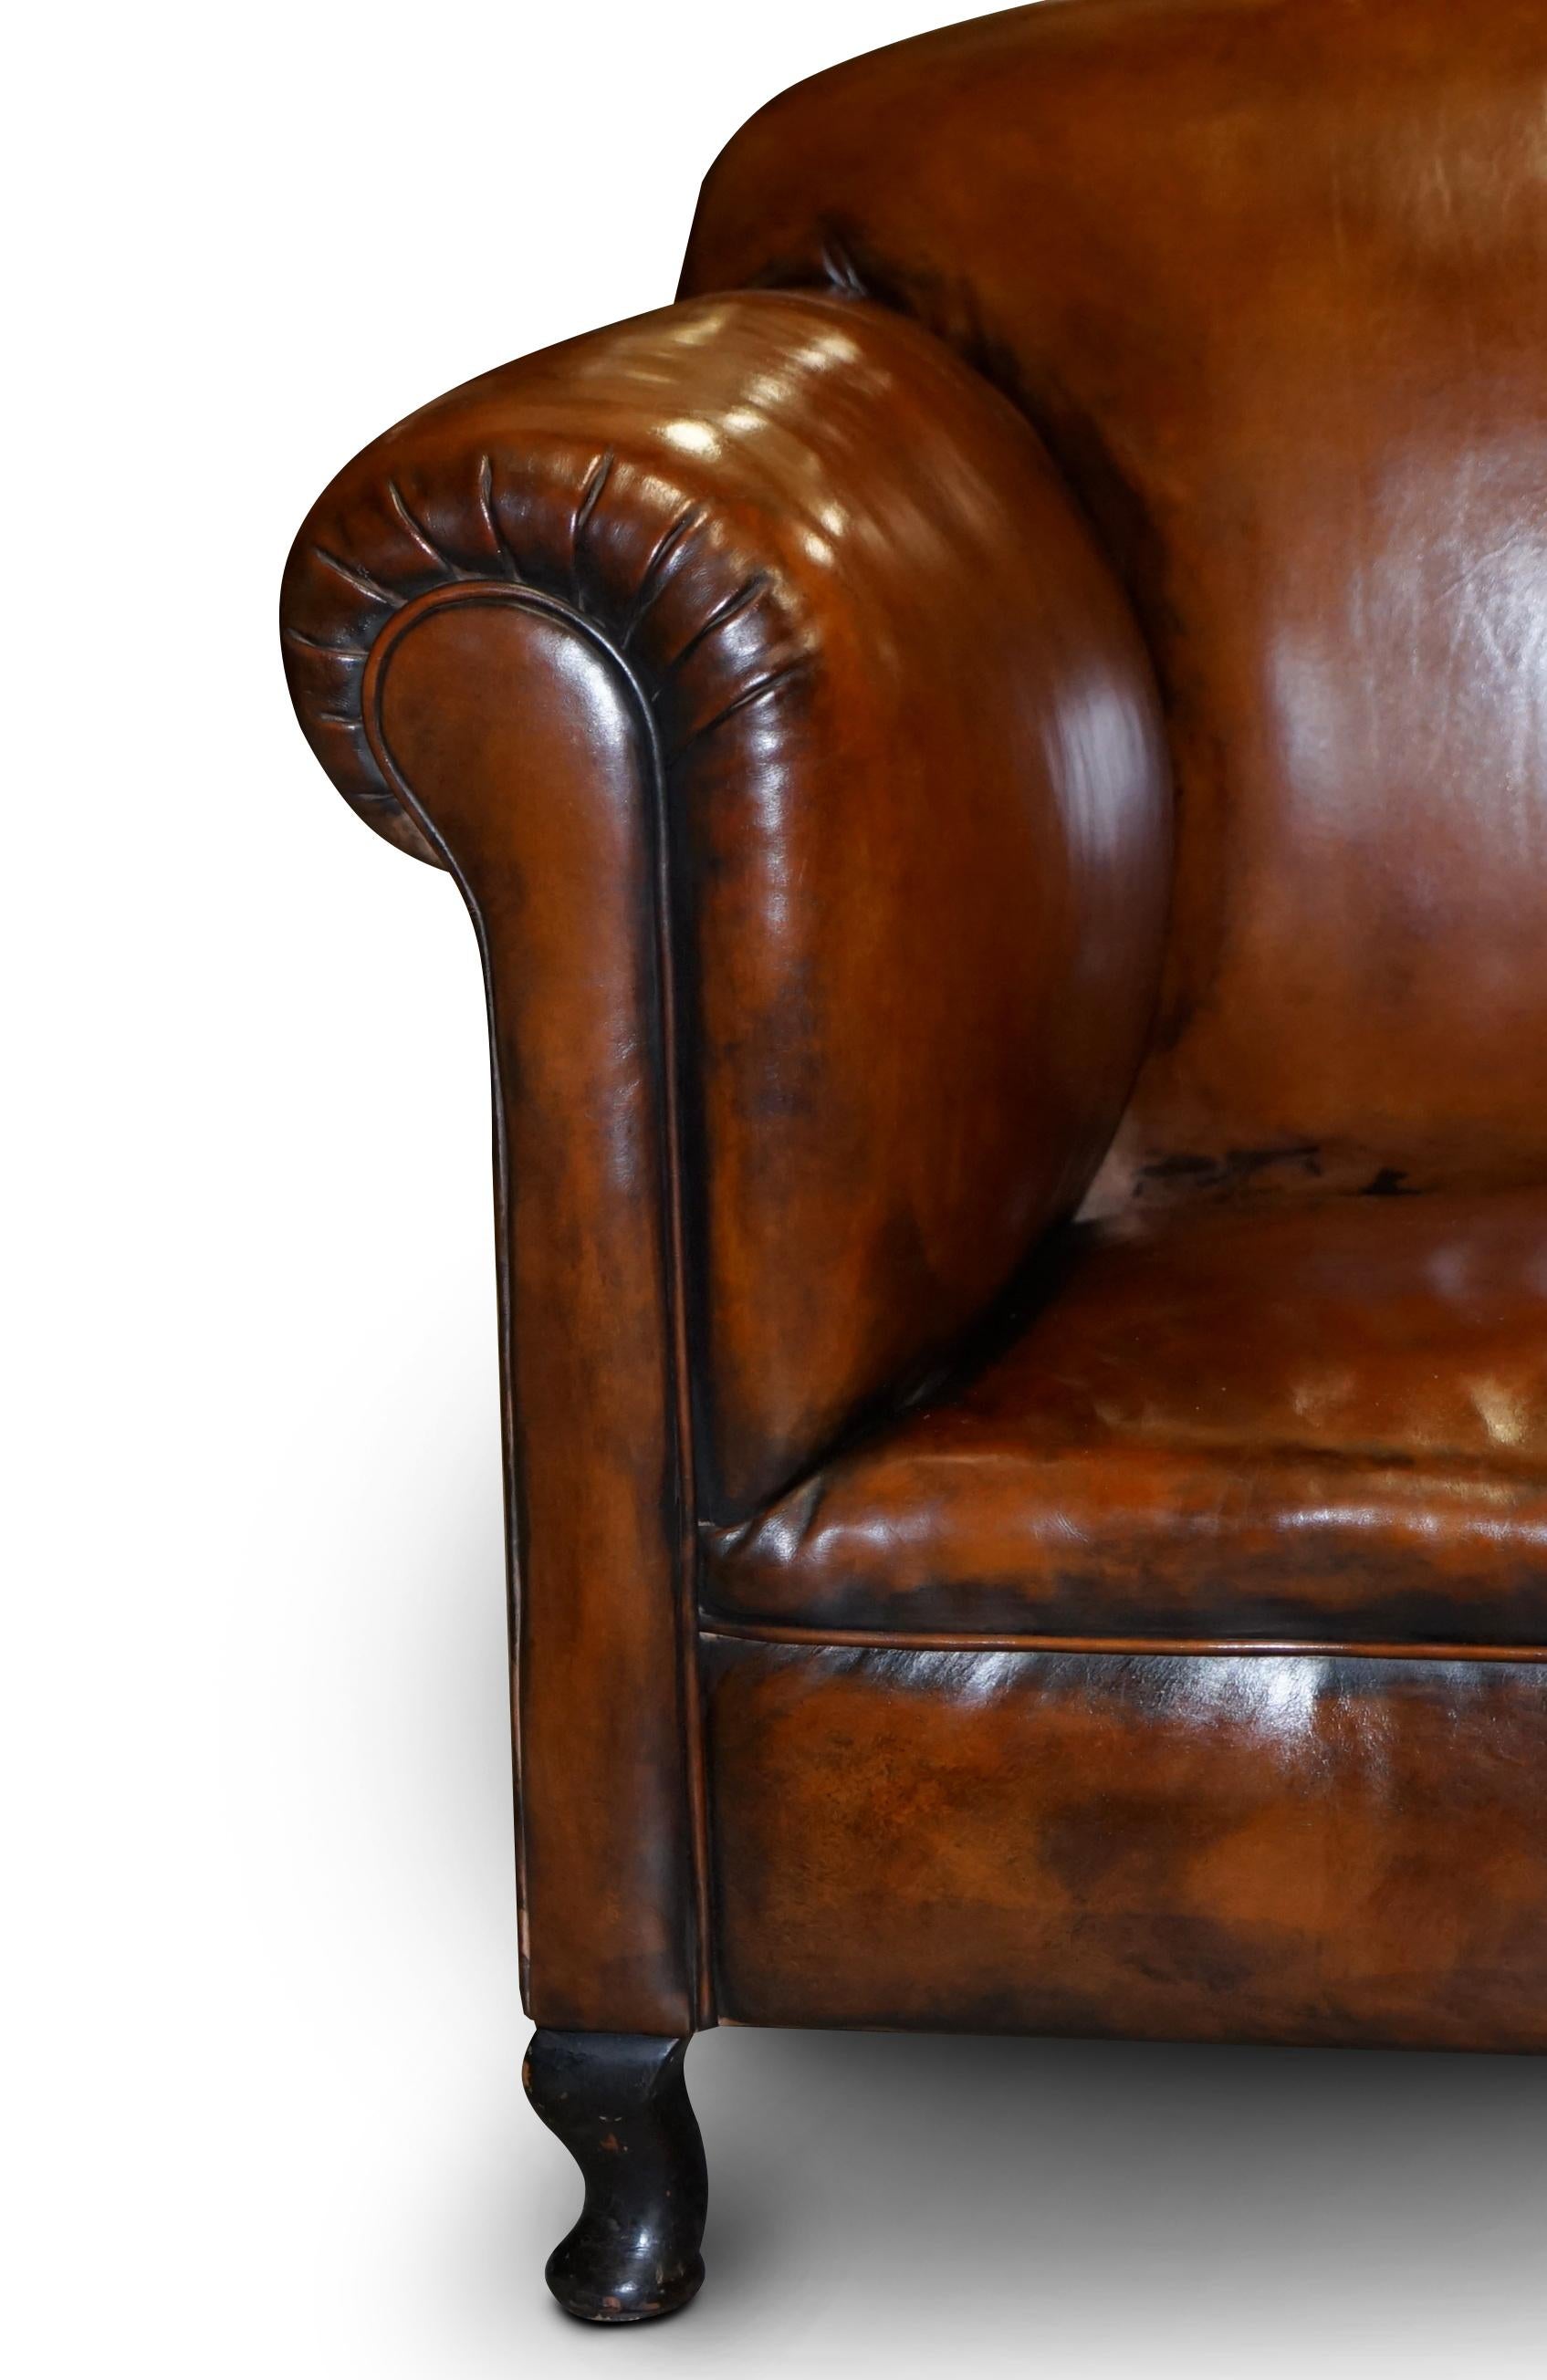 Fully Restored Whisky Brown Leather Drop Arm Chaise Lounge Sofa Horse Hair Fill For Sale 2